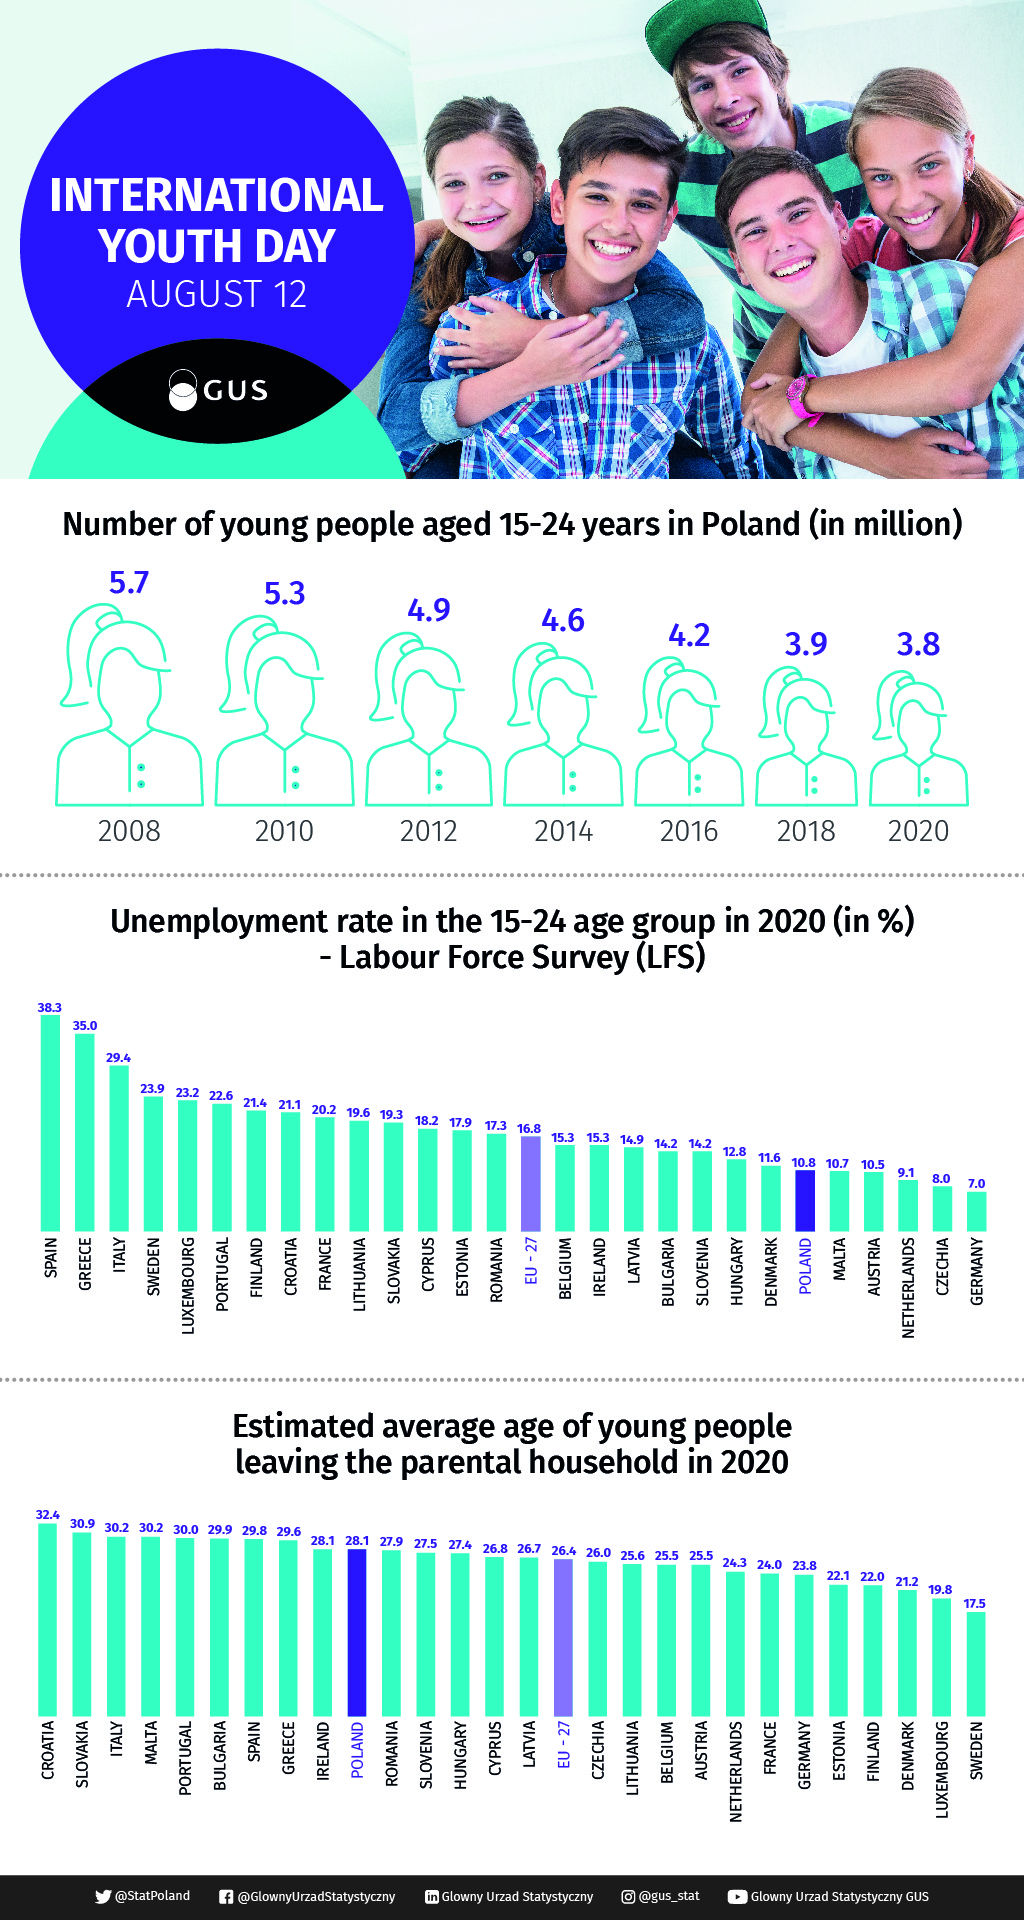 Infographic - International Youth Day (August 12). Data for the infographic can be found in the Excel file attached below